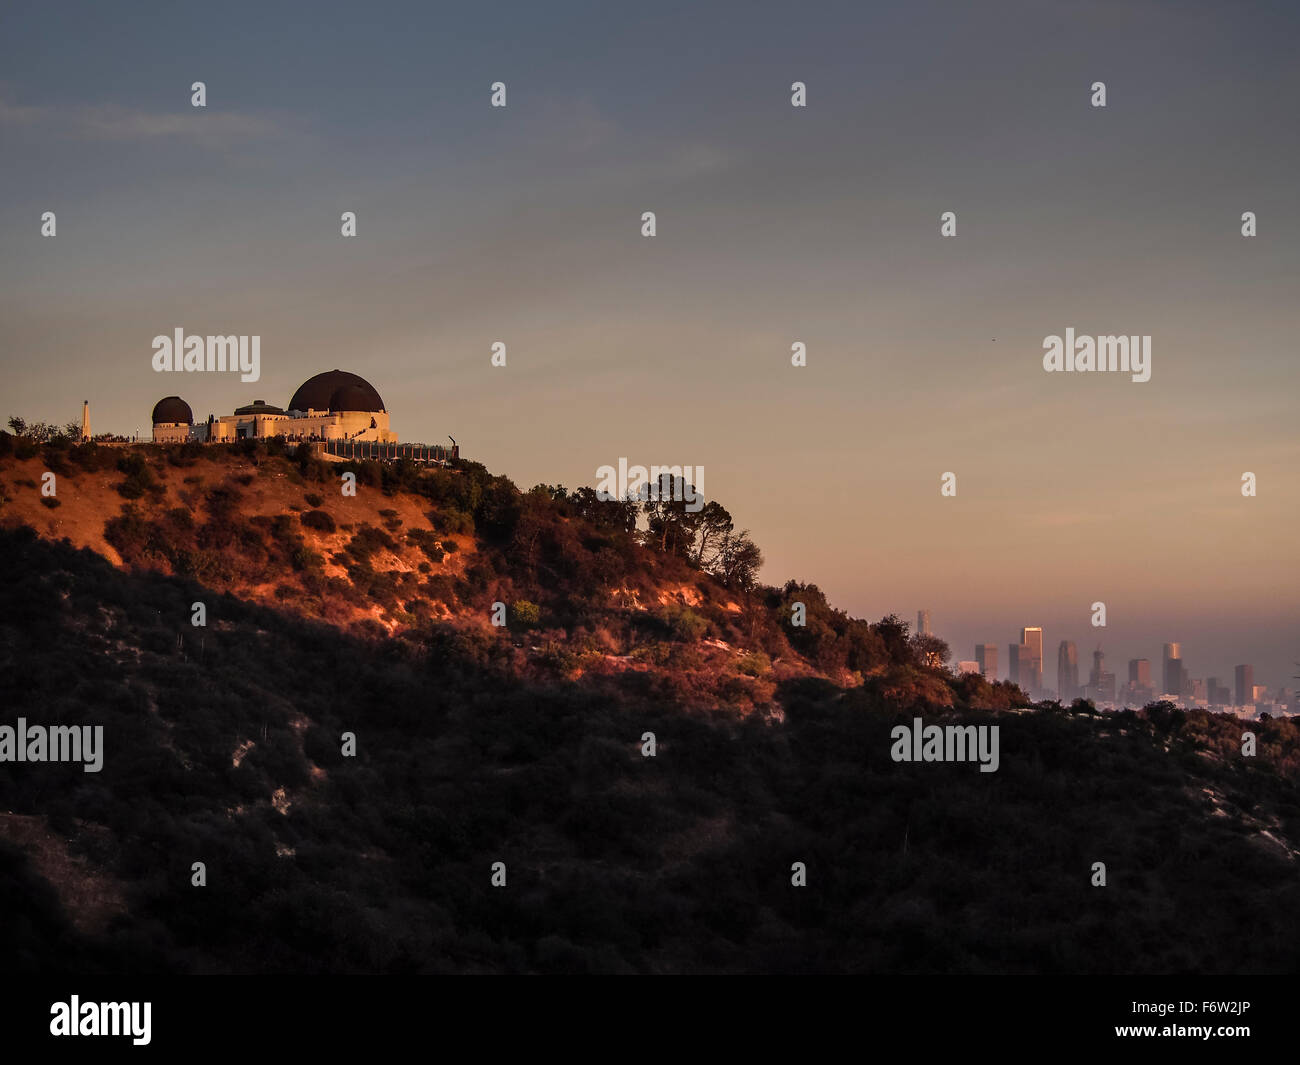 USA, Los Angeles, Griffith Observatory and city skyline at sunset Stock Photo